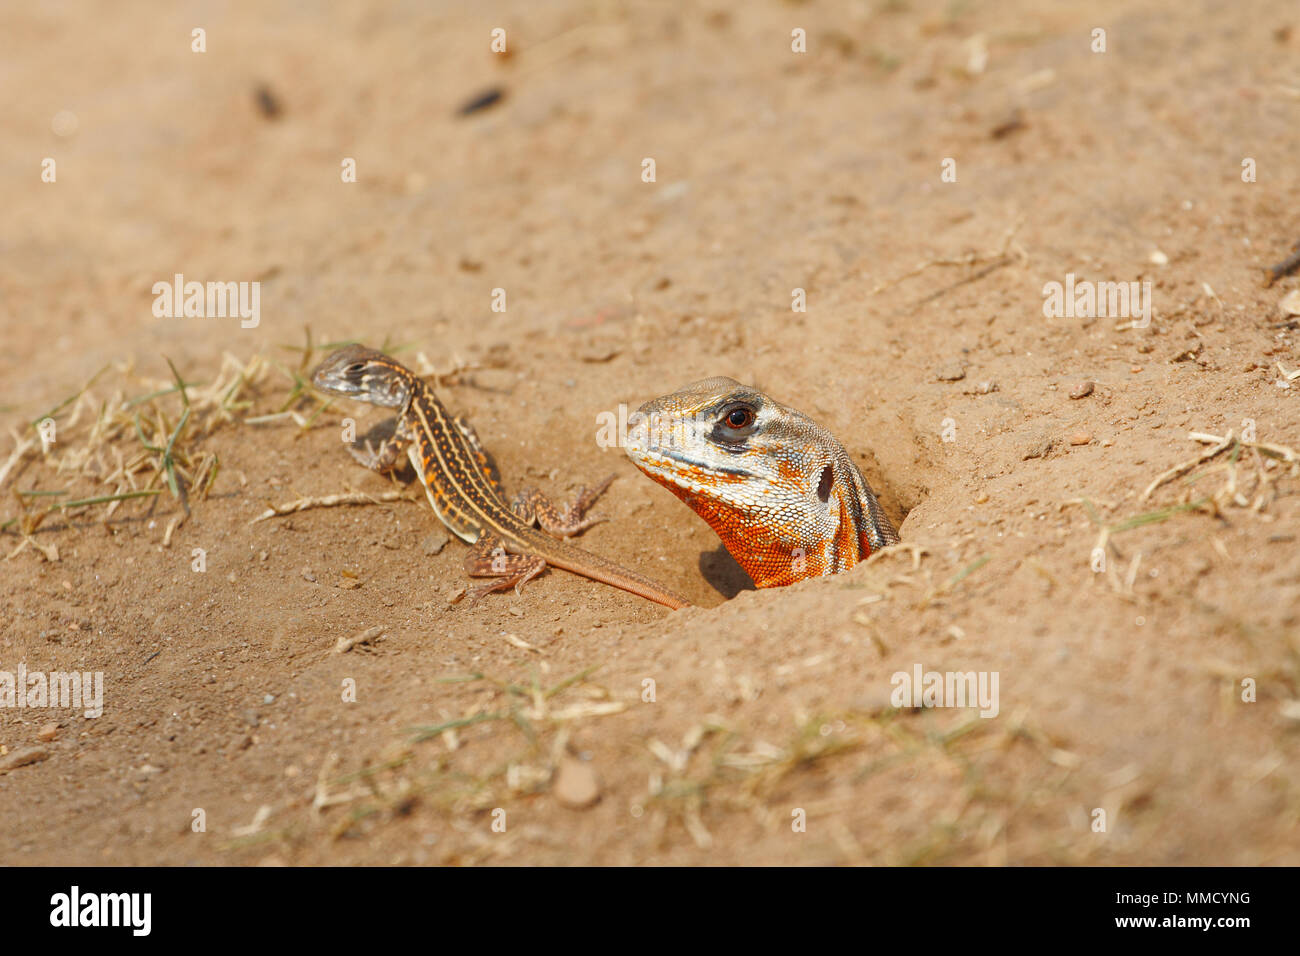 Common butterfly lizard /Butterfly agama (Leiolepis belliana ssp. ocellata) emerge from the burrow with newborn Stock Photo